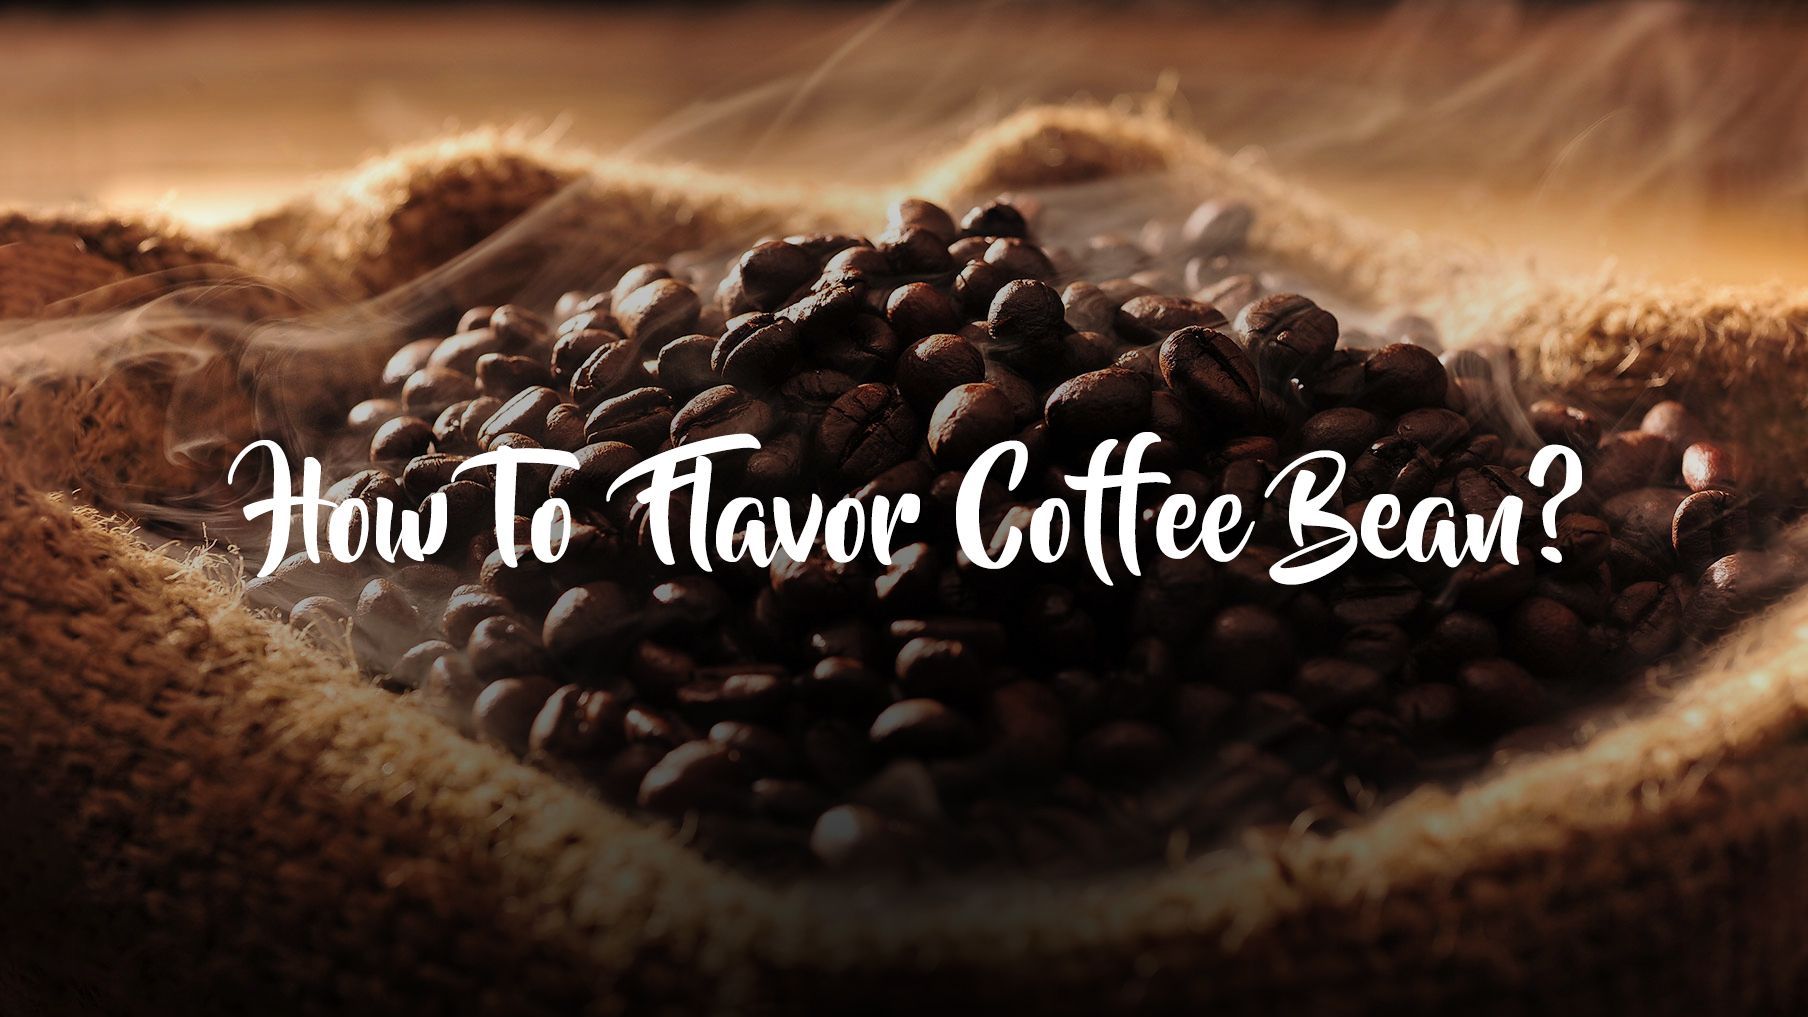 How To Flavor Coffee Bean?